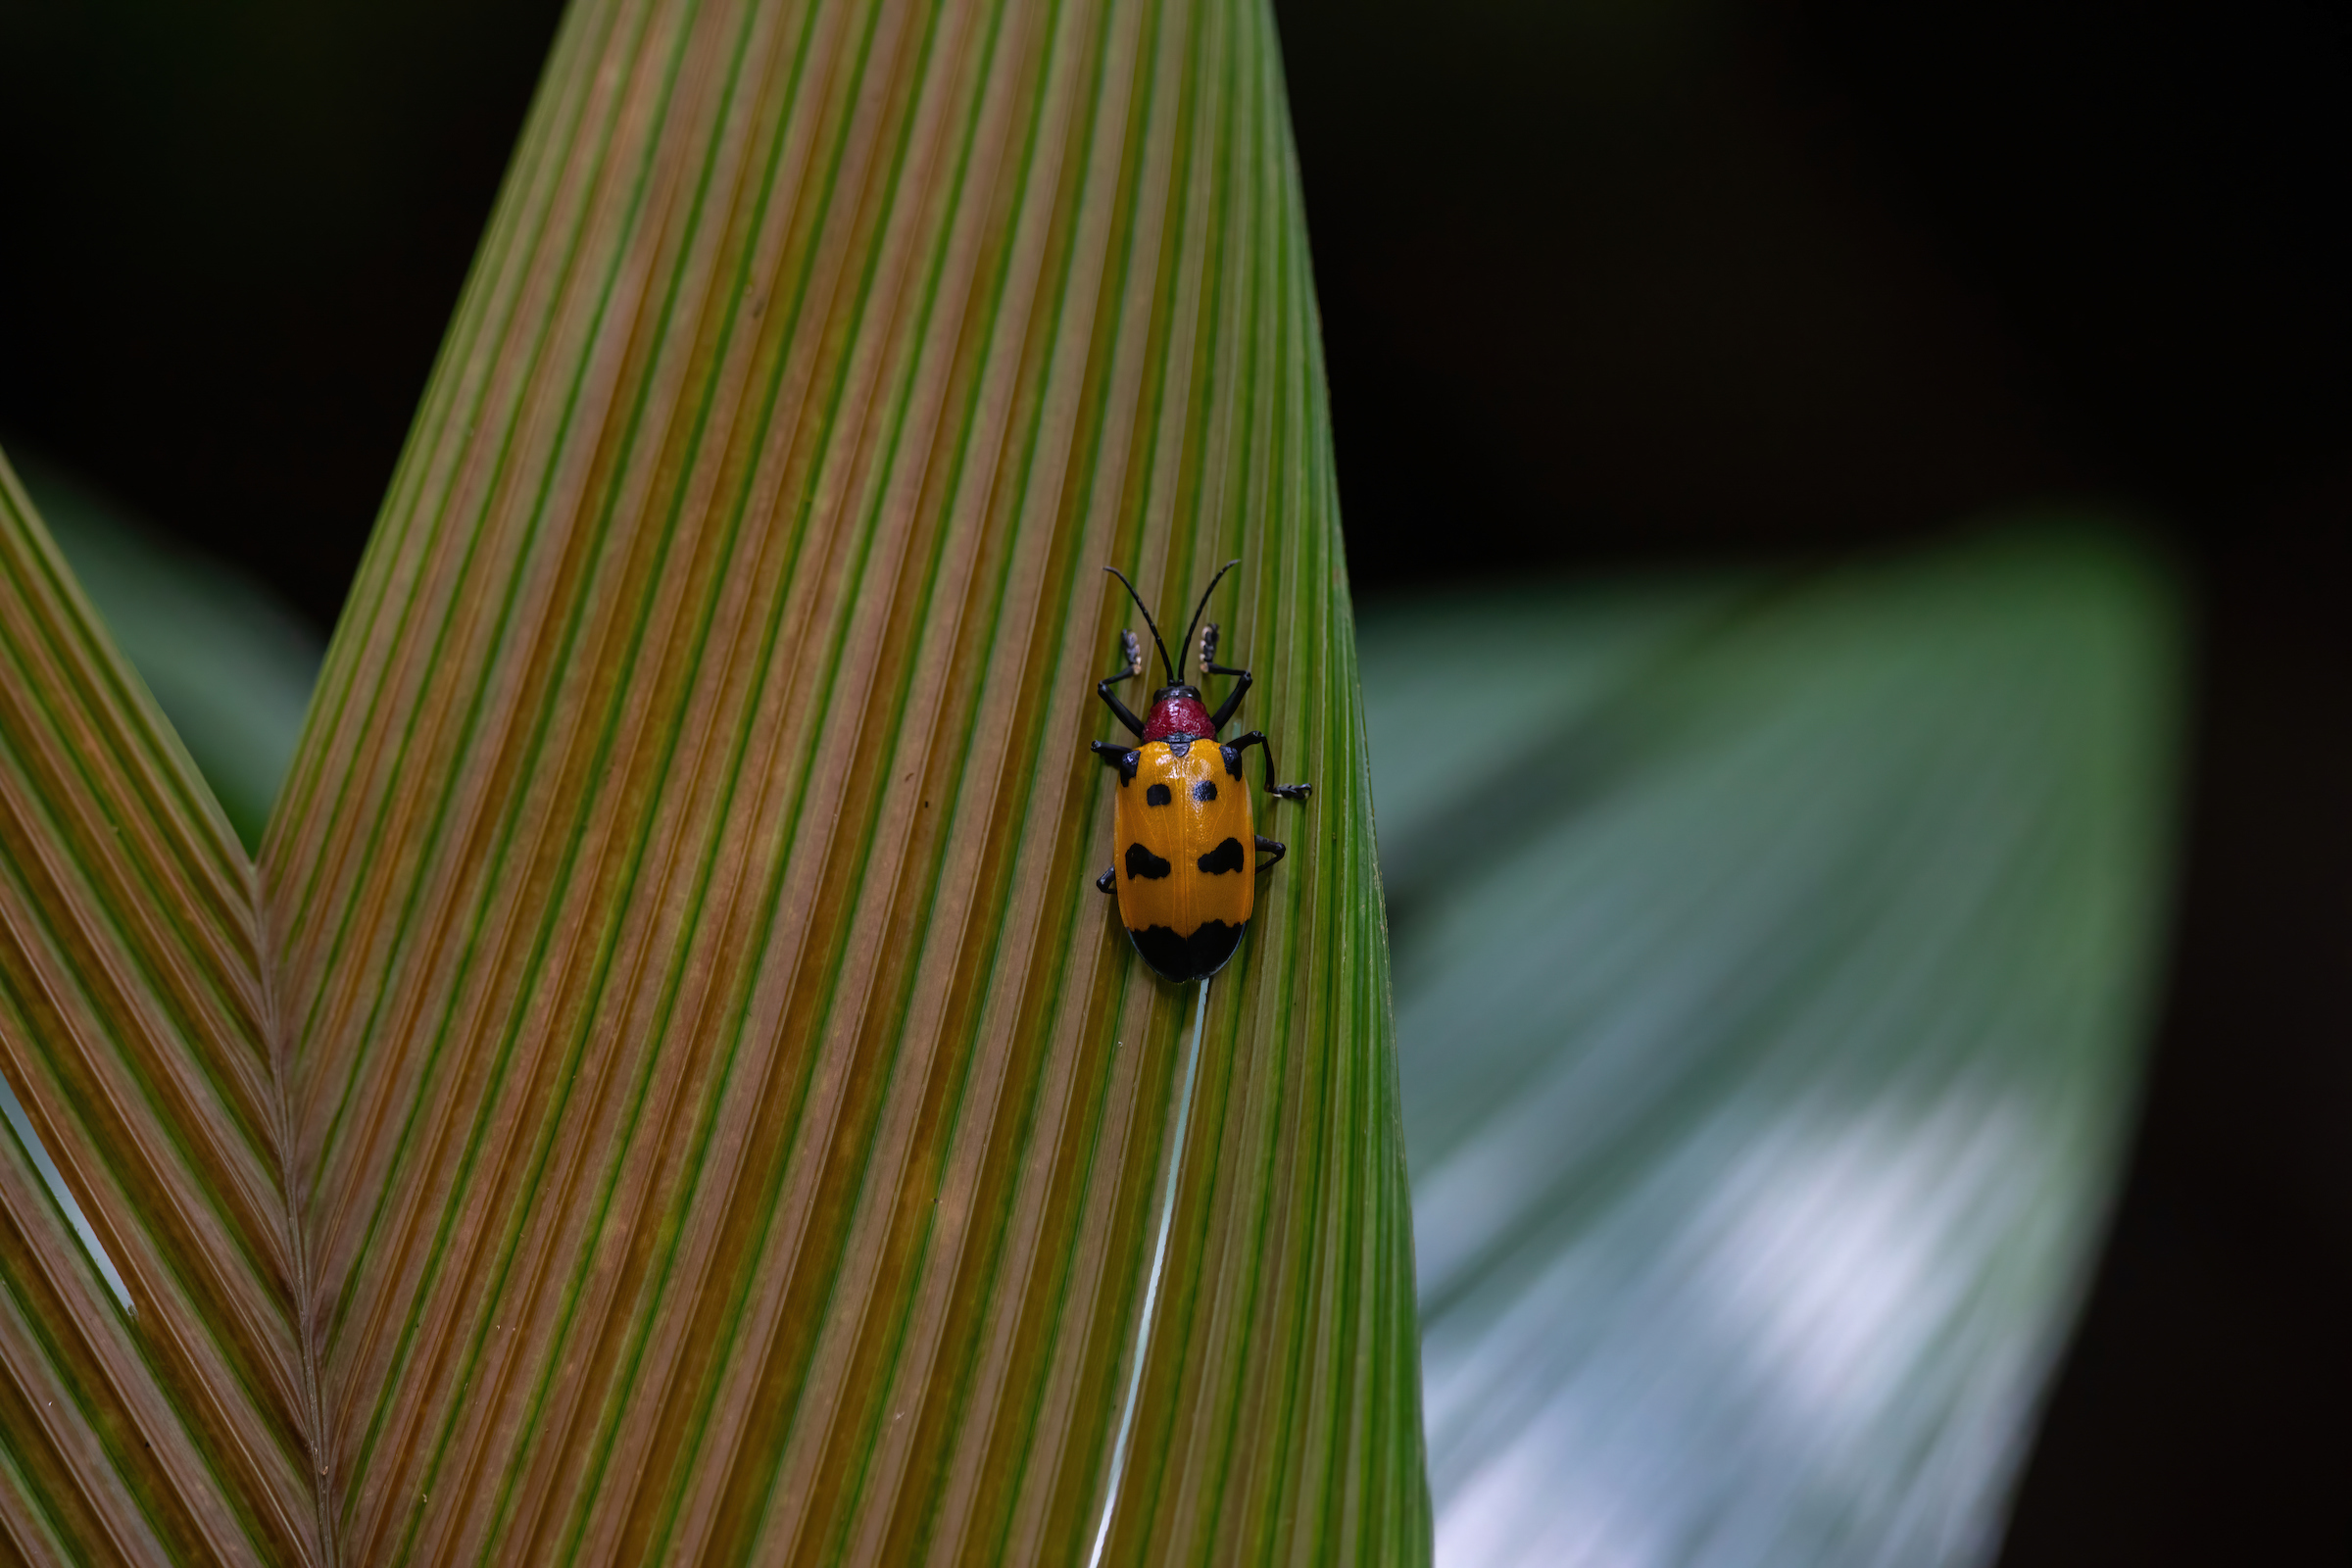 Our tour searches for all of Costa Rica's rainforest life including pretty Leaf Beetles